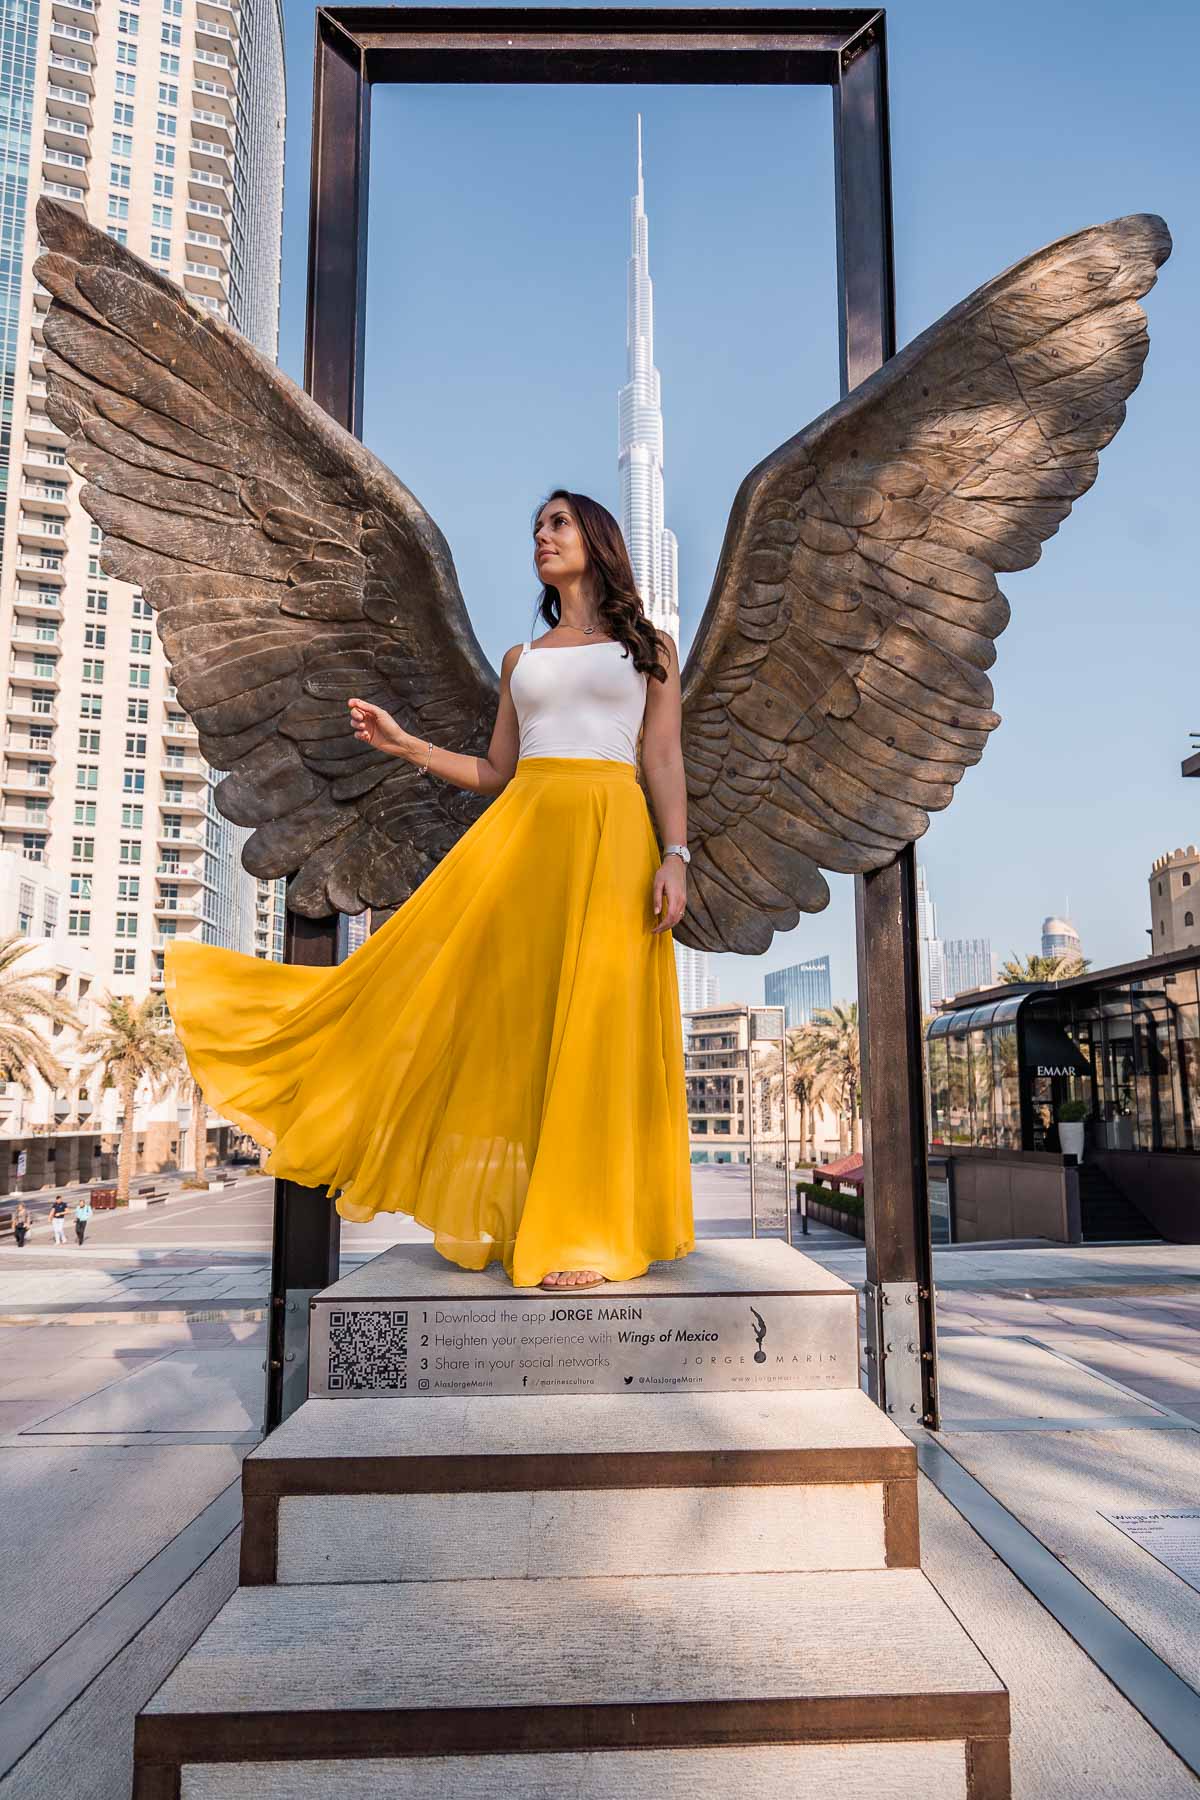 Girl in yellow skirt doing a skirt flip in front of the Wings of Mexico in Dubai with the Burj Khalifa in the background